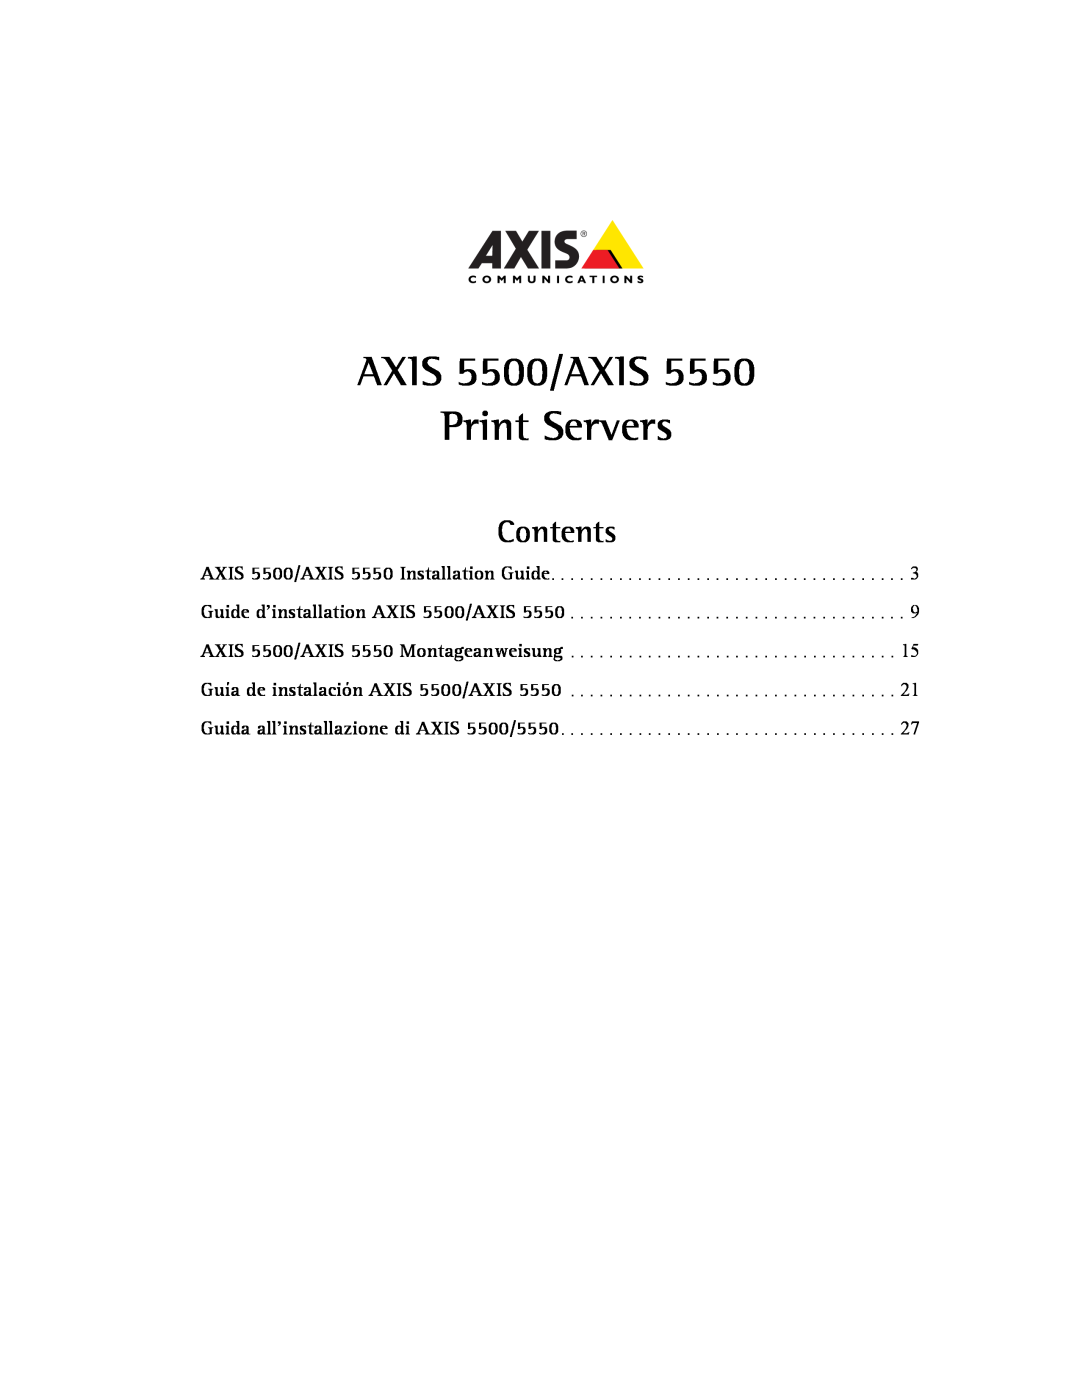 Axis Communications AXIS 5550 manual AXIS 5500/AXIS Print Servers, Contents 